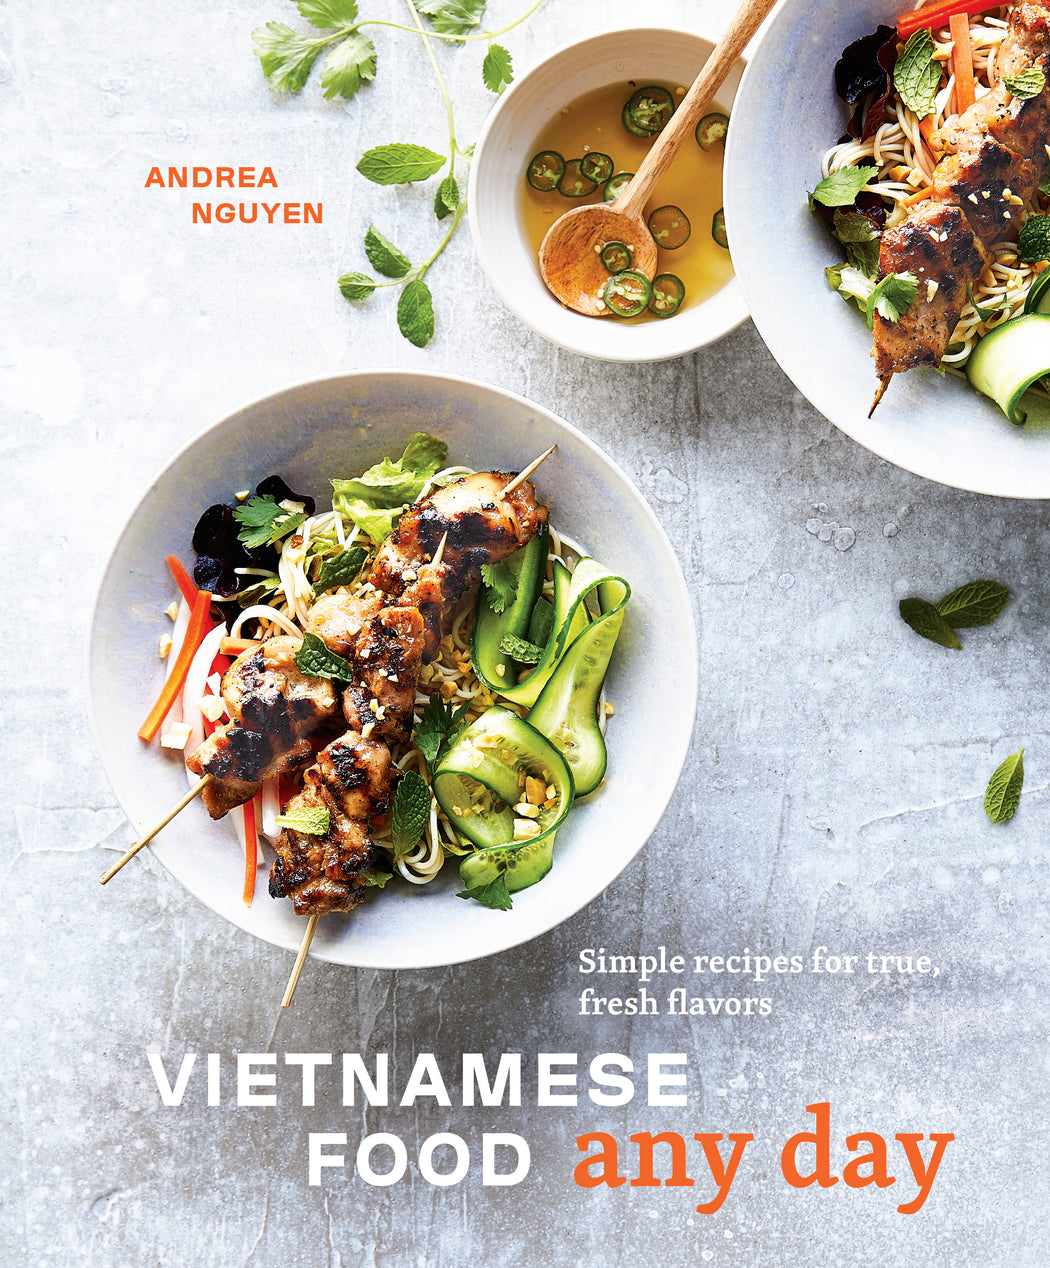 Front cover of book, "Vietnamese Food Any Day" by Andrea Nguyen